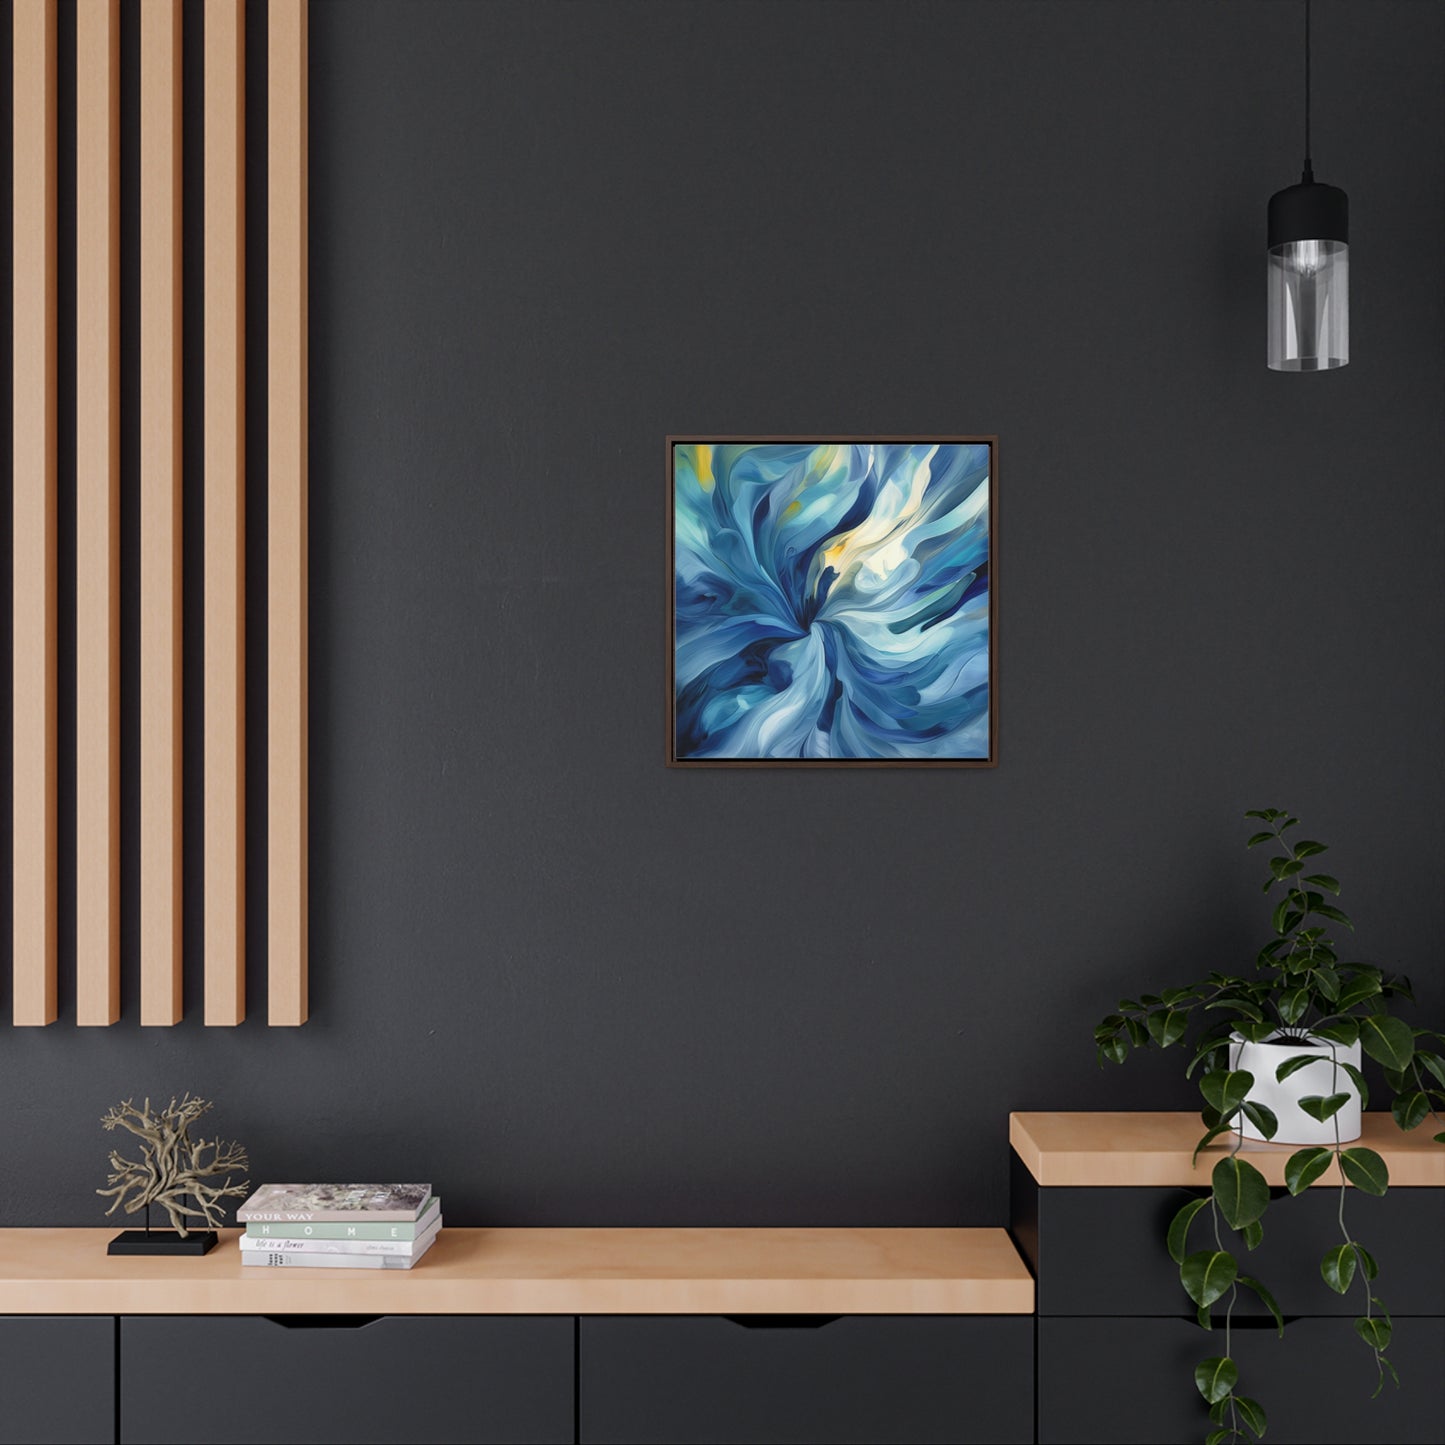 Gallery Canvas Wraps, Square Frame Blue Tluip Abstract 4